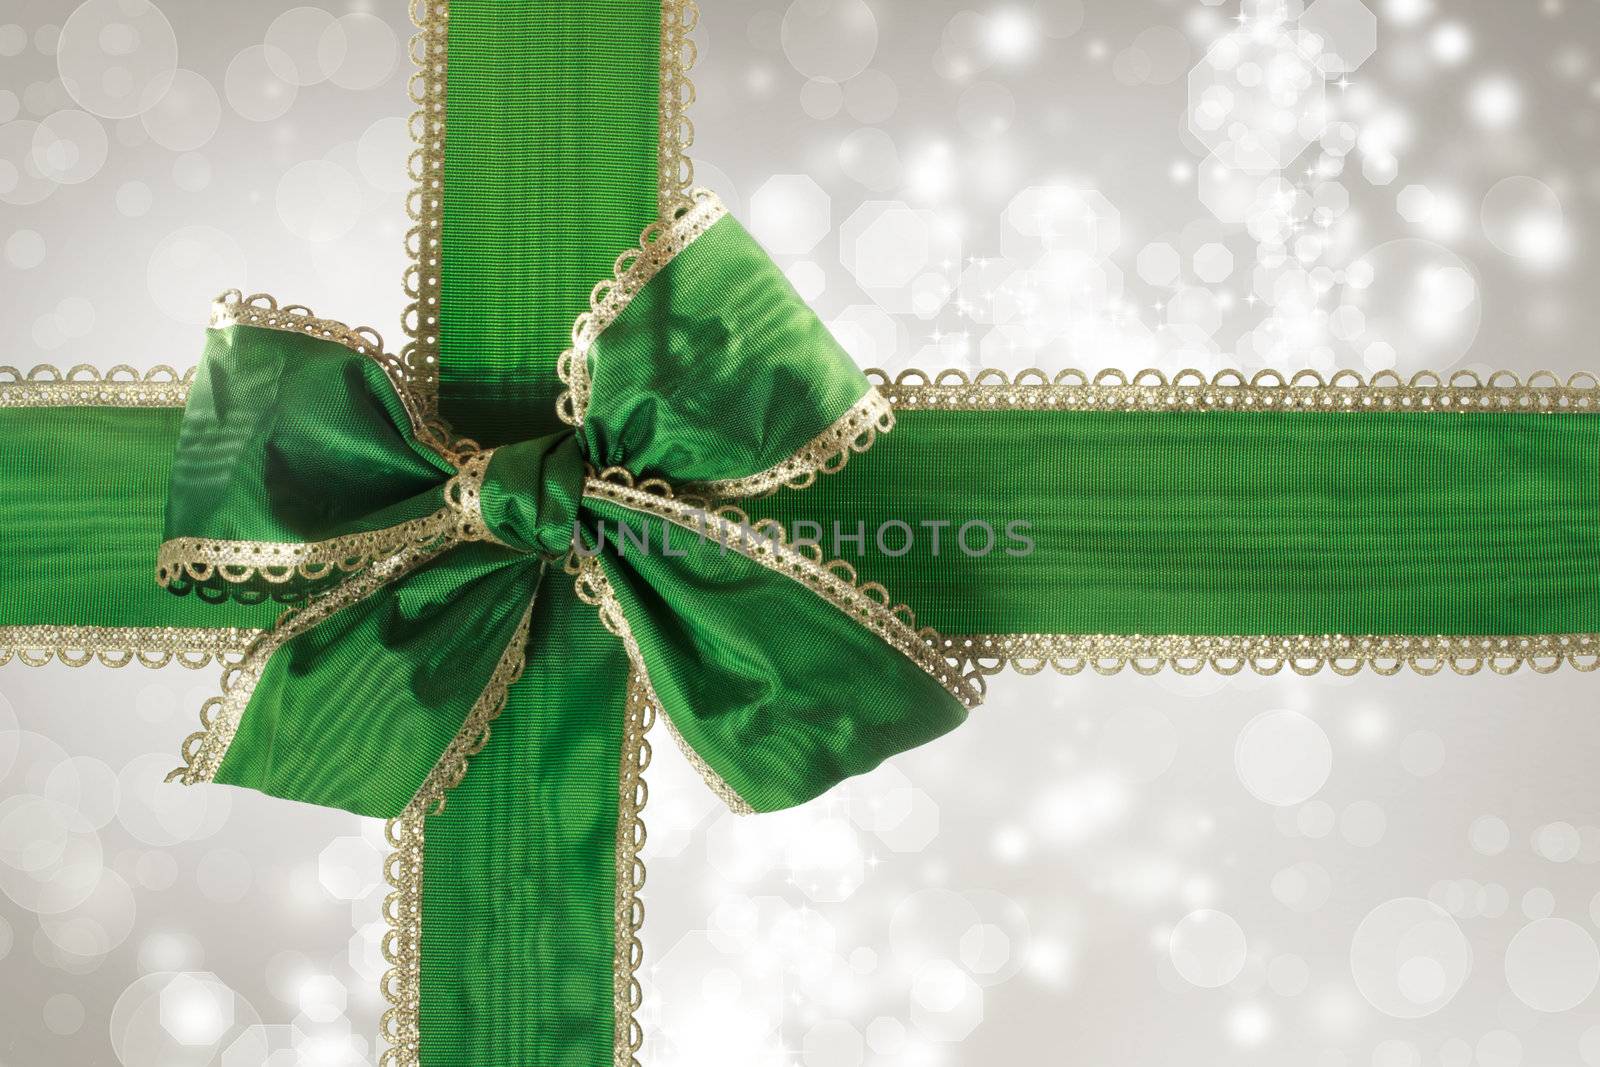 Green Bow and Ribbon with Silver Bokeh Lights Background 